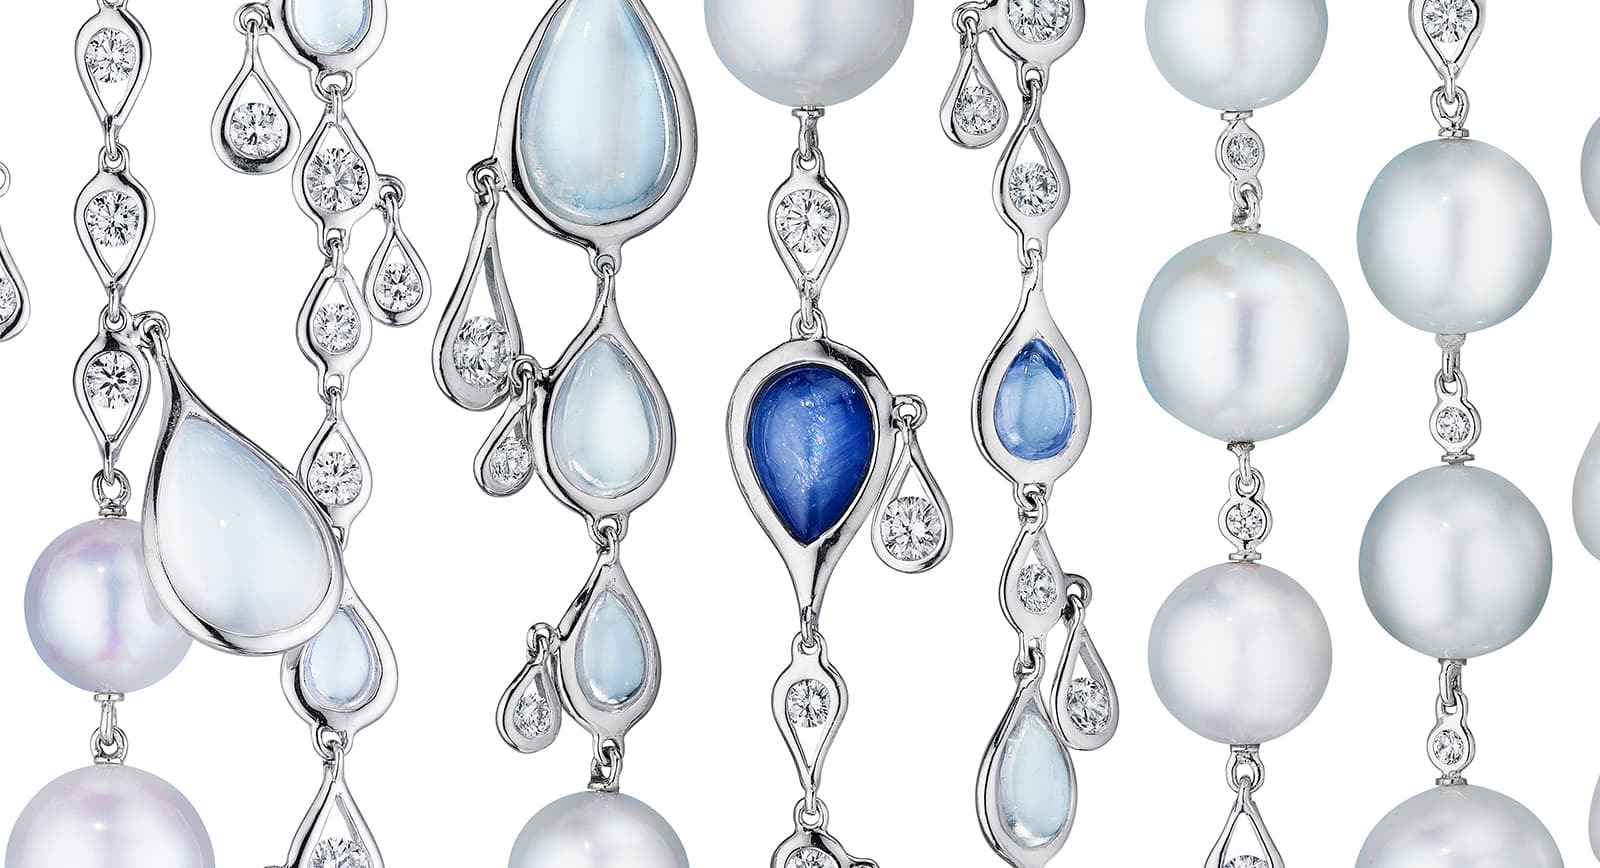 Maria Canale: Fine jewellery collections raising money for Water.org 